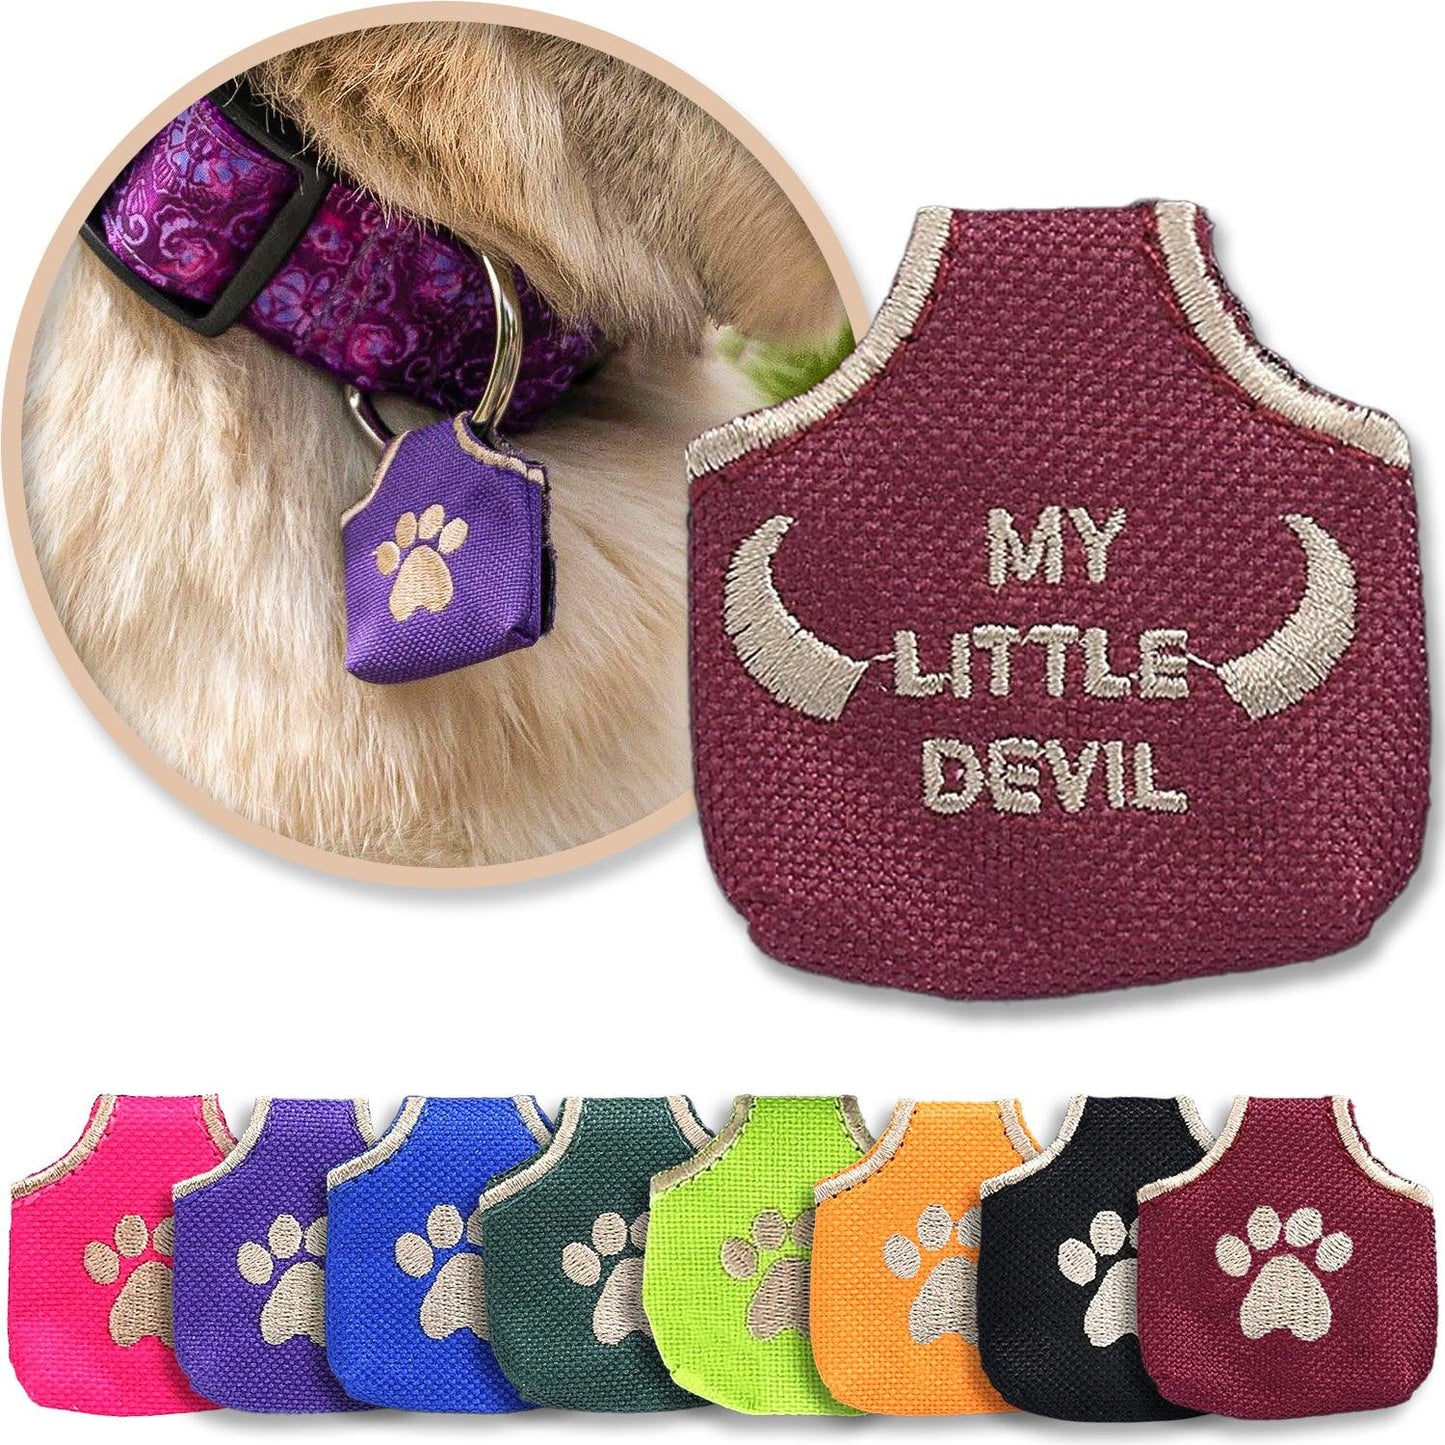 Red 'My Little Devil' pet tag silencer